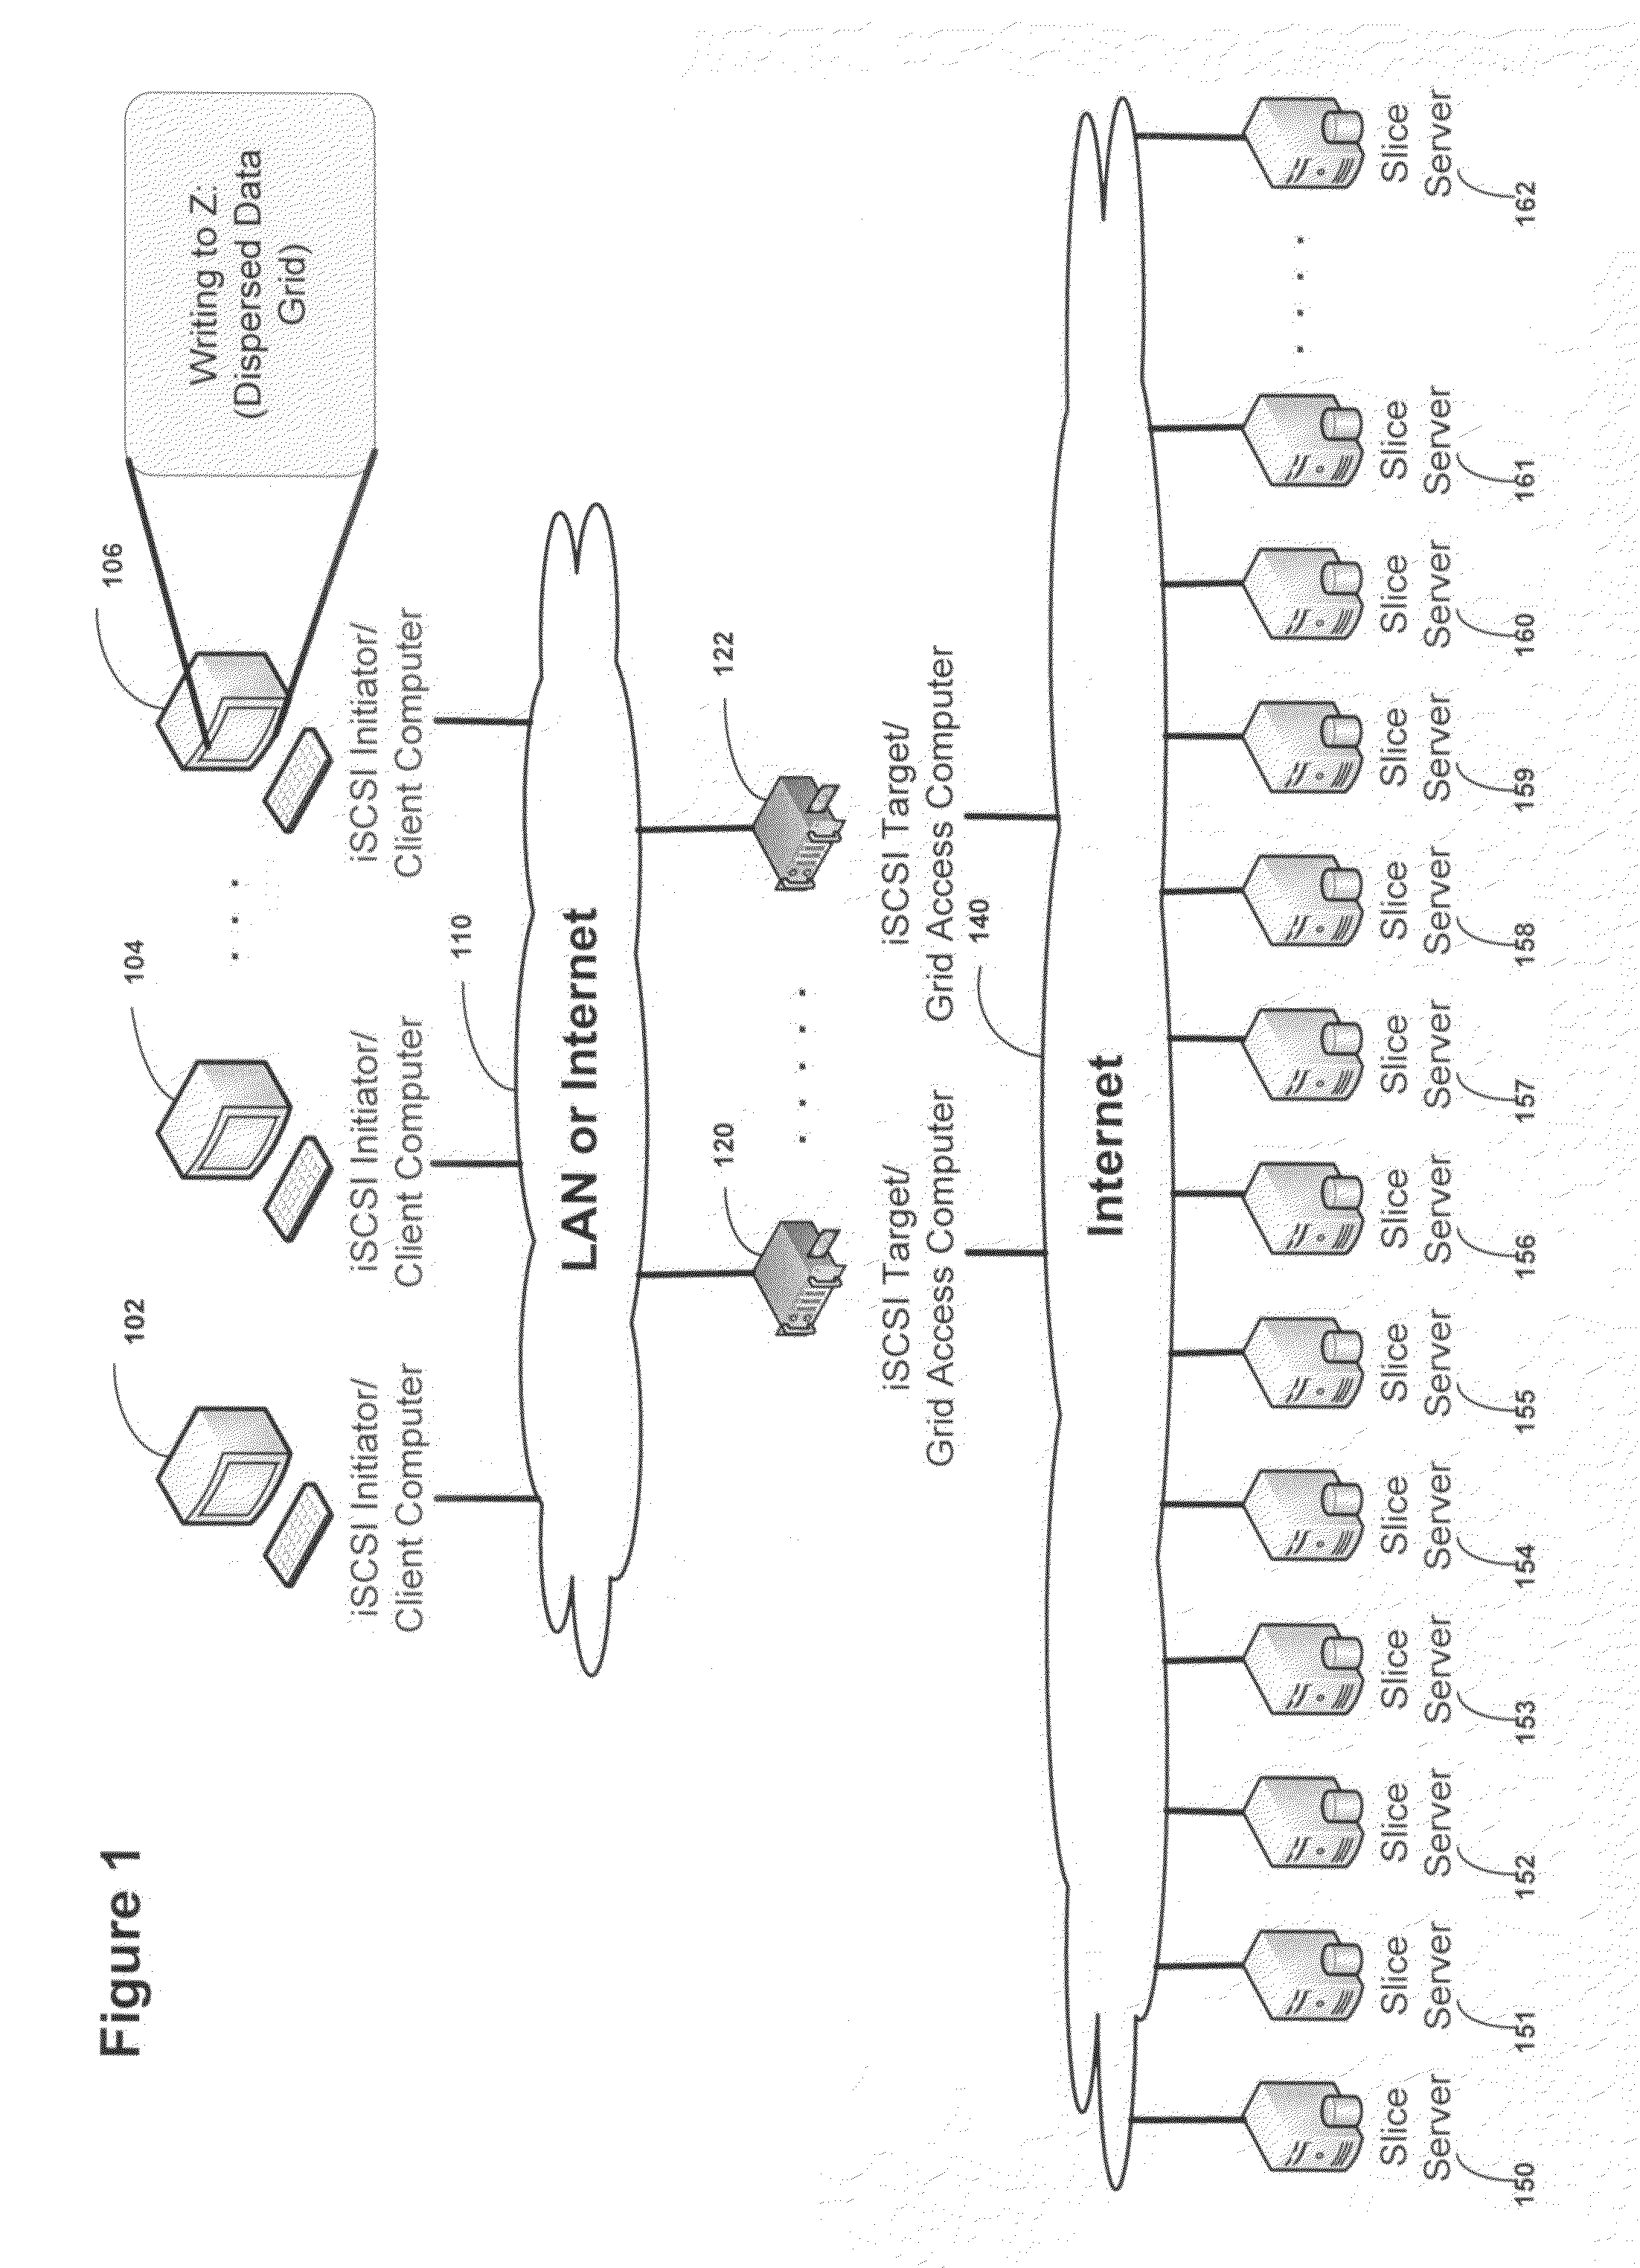 Block based access to a dispersed data storage network